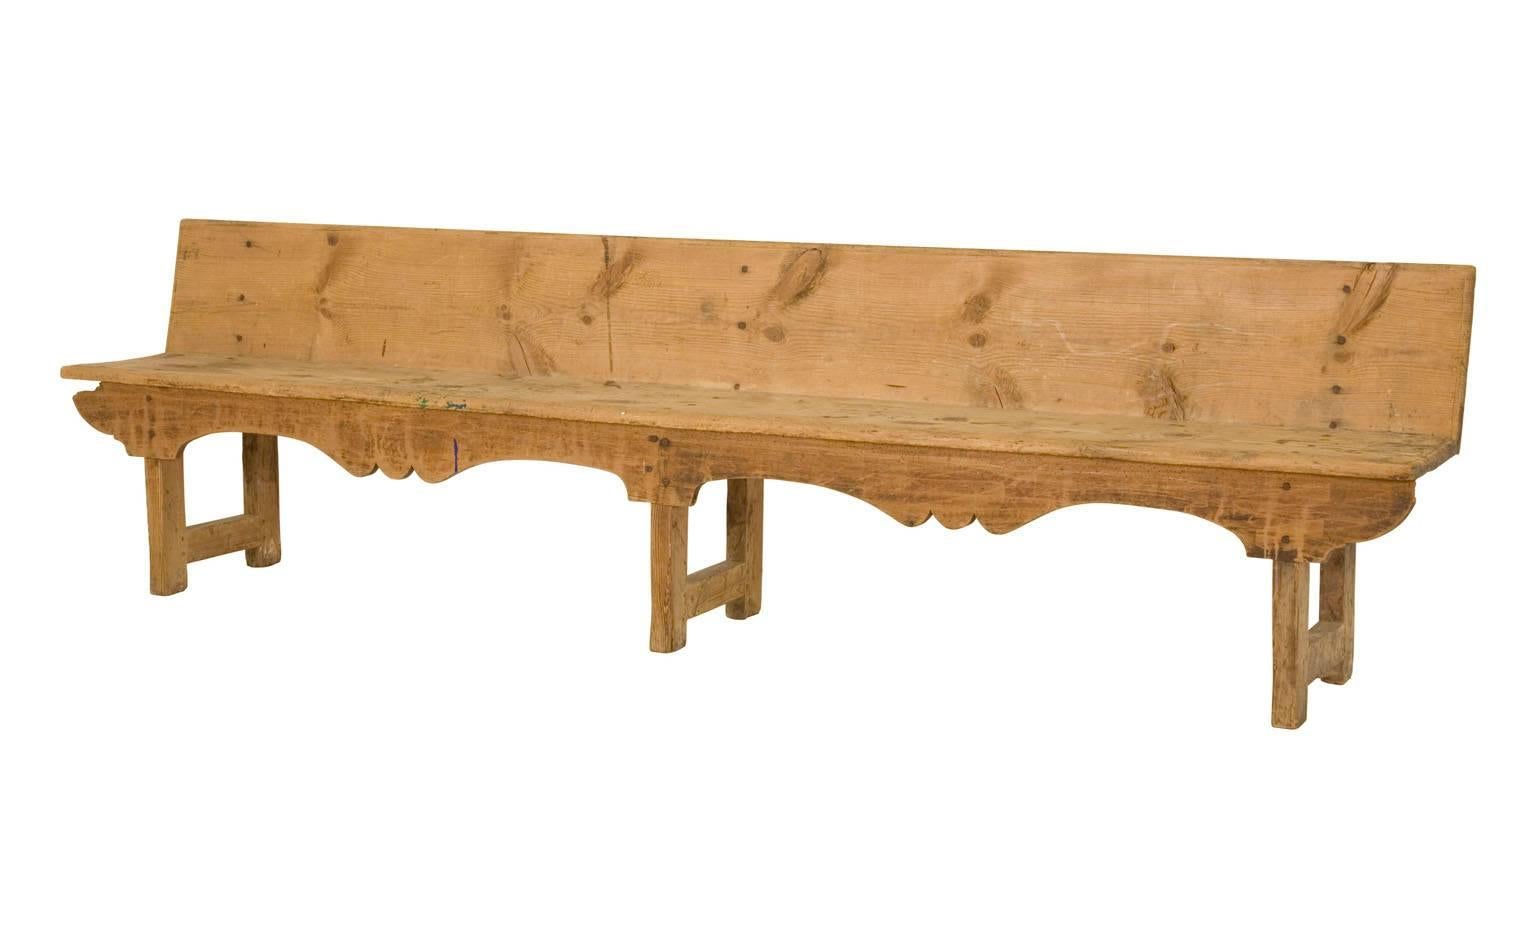 Stripped wood finish
Weathered patina
Early 20th century
Provence

Dimensions
Overall: 118